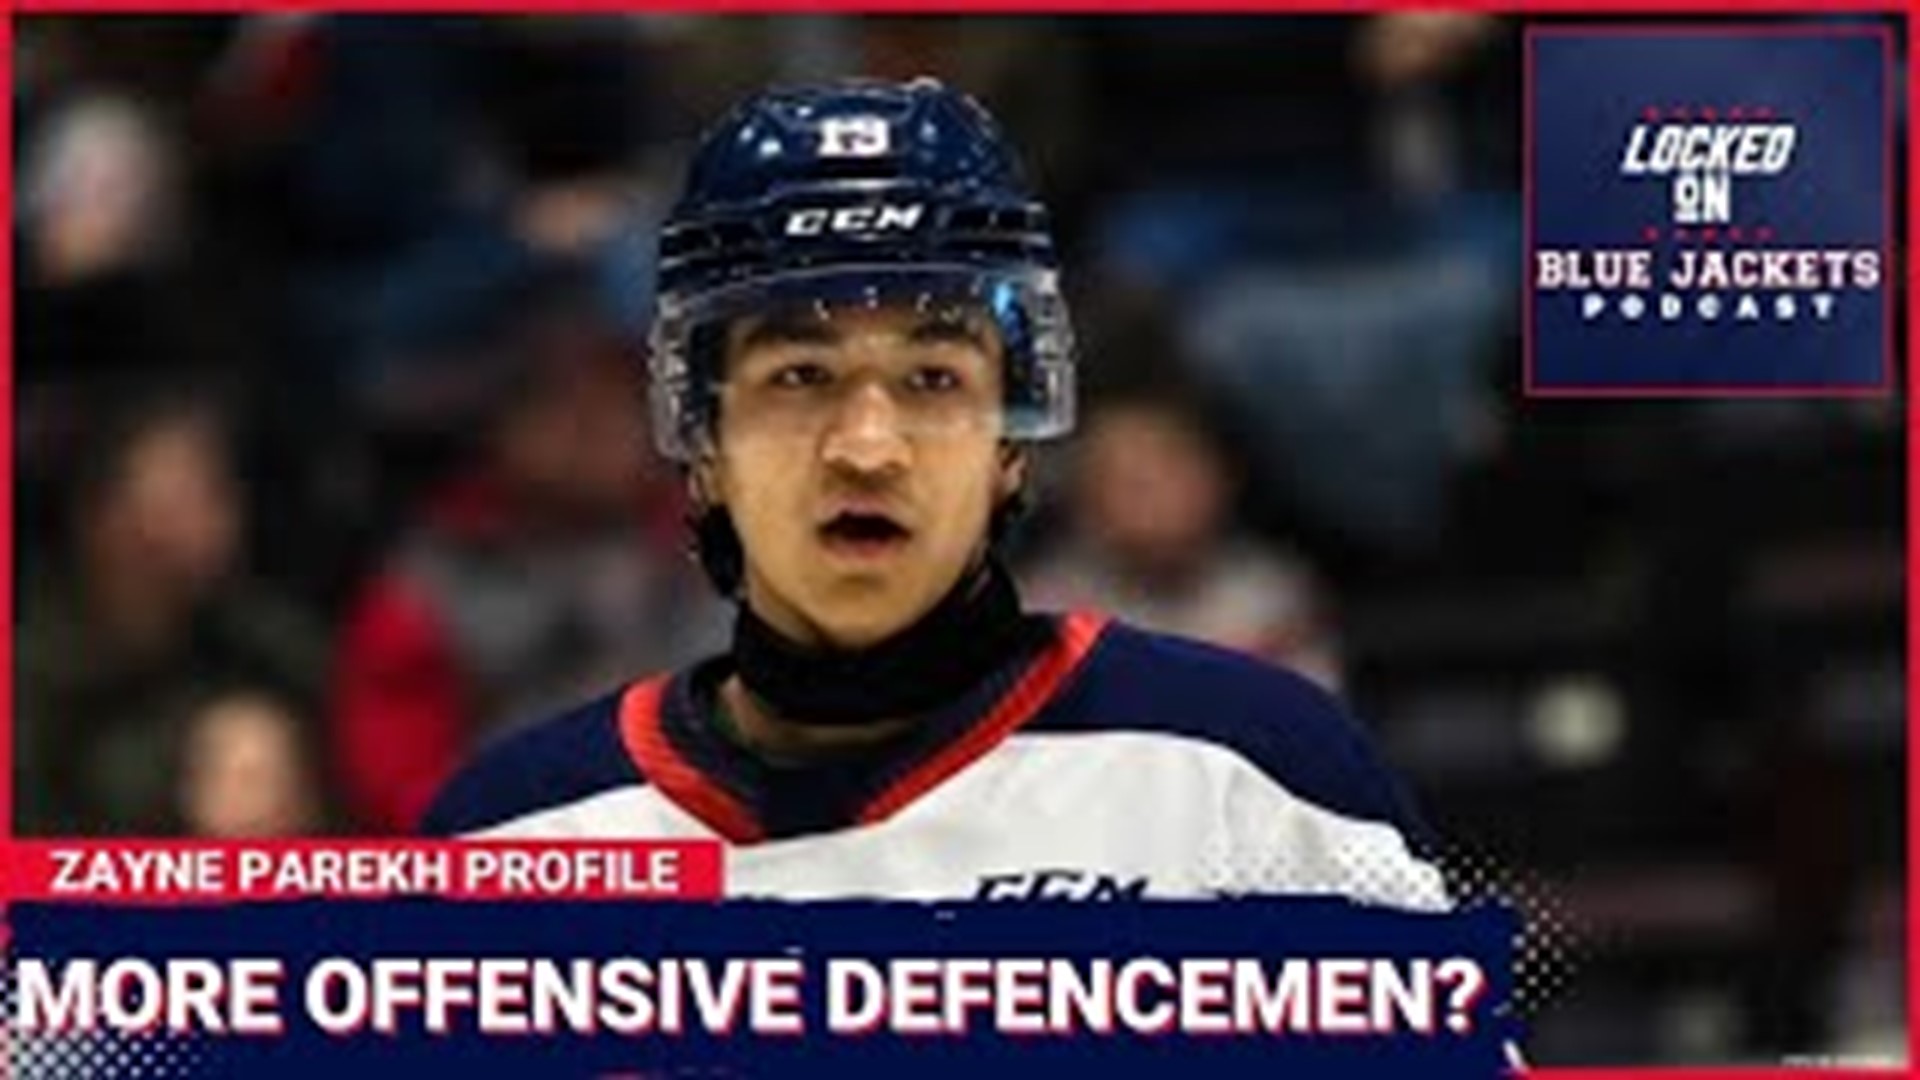 The Blue Jackets have a lot of offensive defencemen, do they really need another? Will Scouch of Scouching is here to talk all about Zayne Parekh lighting up the OHL